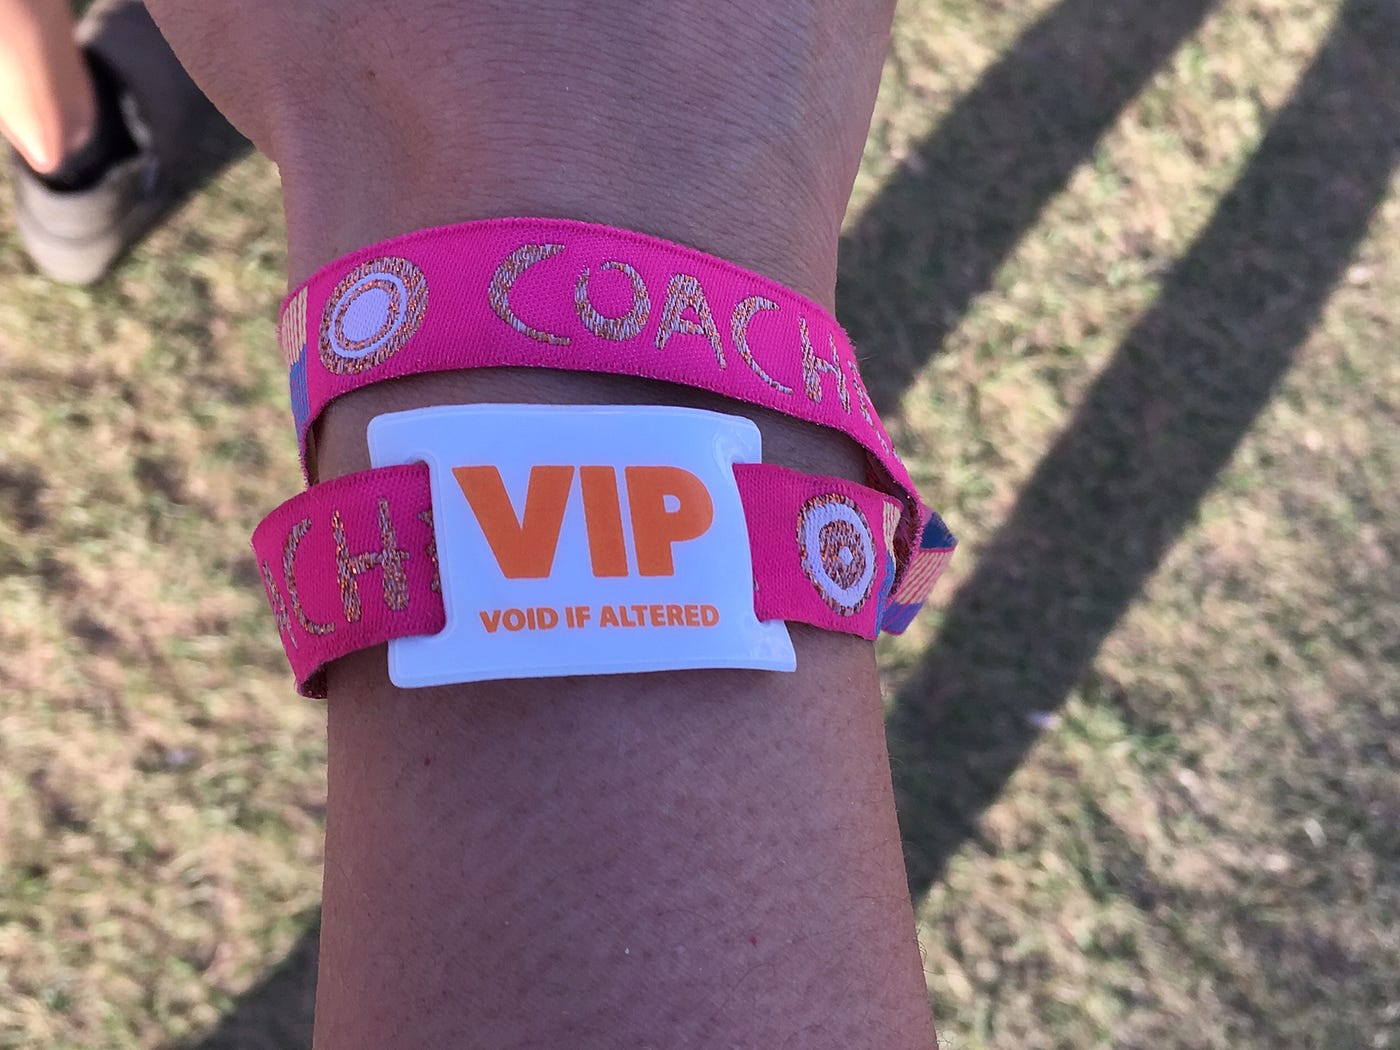 HOW COACHELLA VIP ACCESS TURNED ME INTO A SELF-ENTITLED CUNT IN JUST FOUR  HOURS | by Roger Jao | Medium